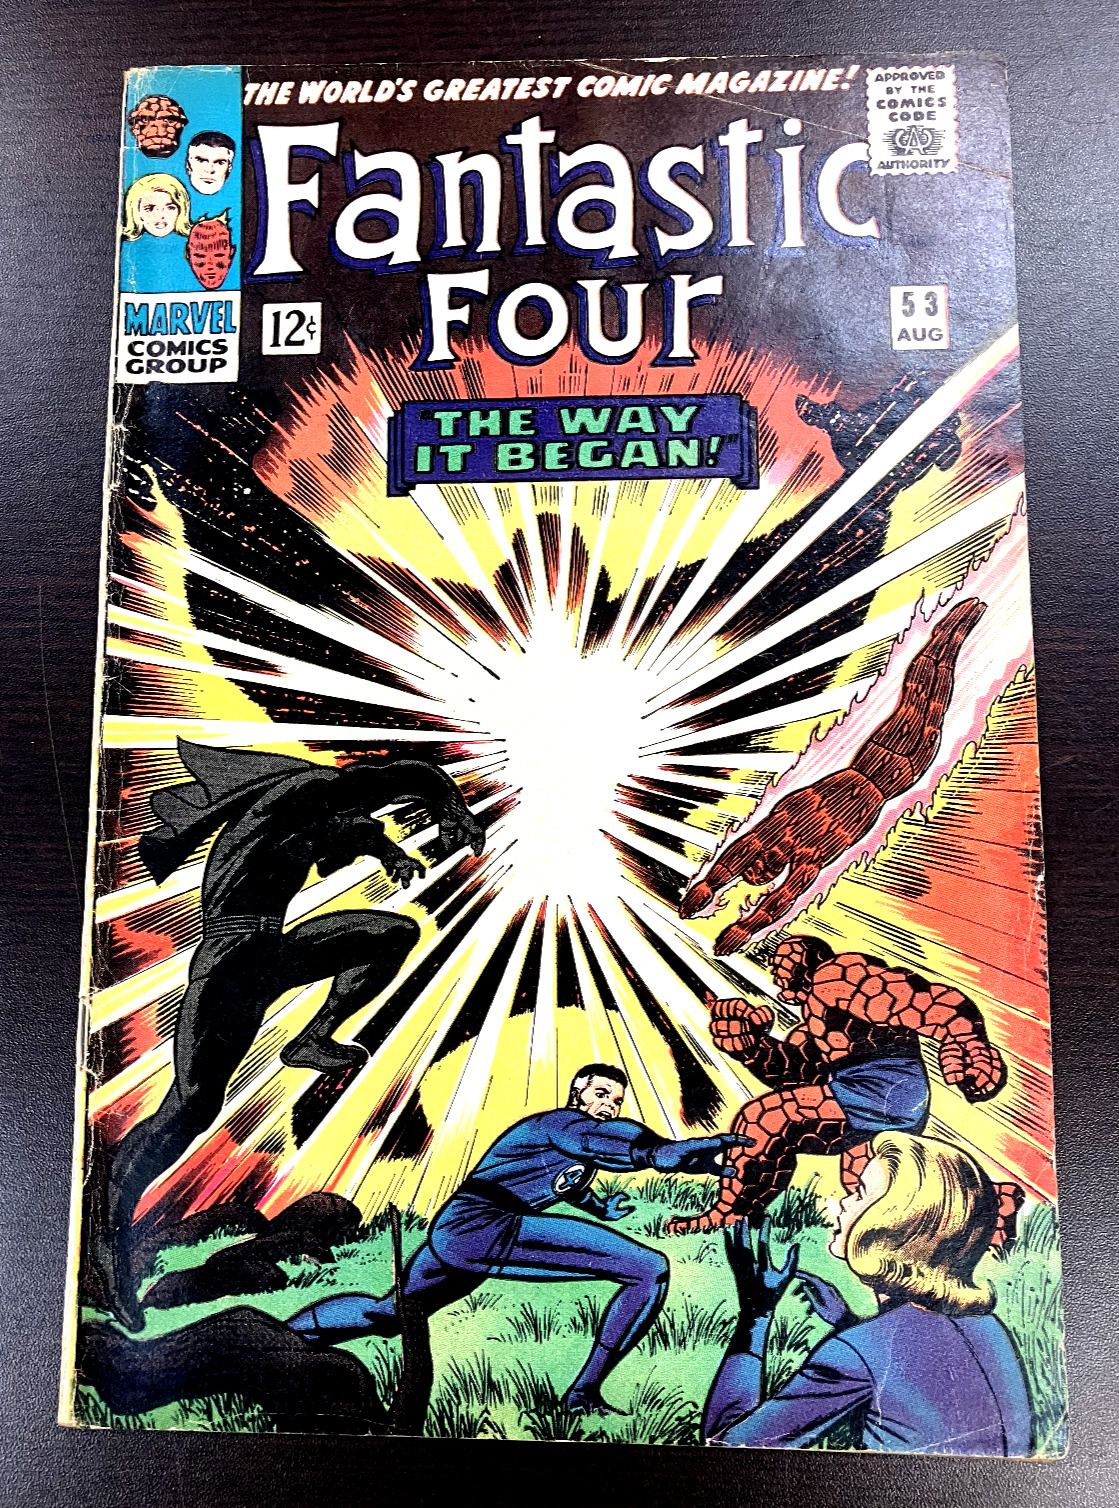 FANTASTIC FOUR #53 Marvel 2ND BLACK PANTHER/1ST KLAW Lee & Kirby Classic (VG-)